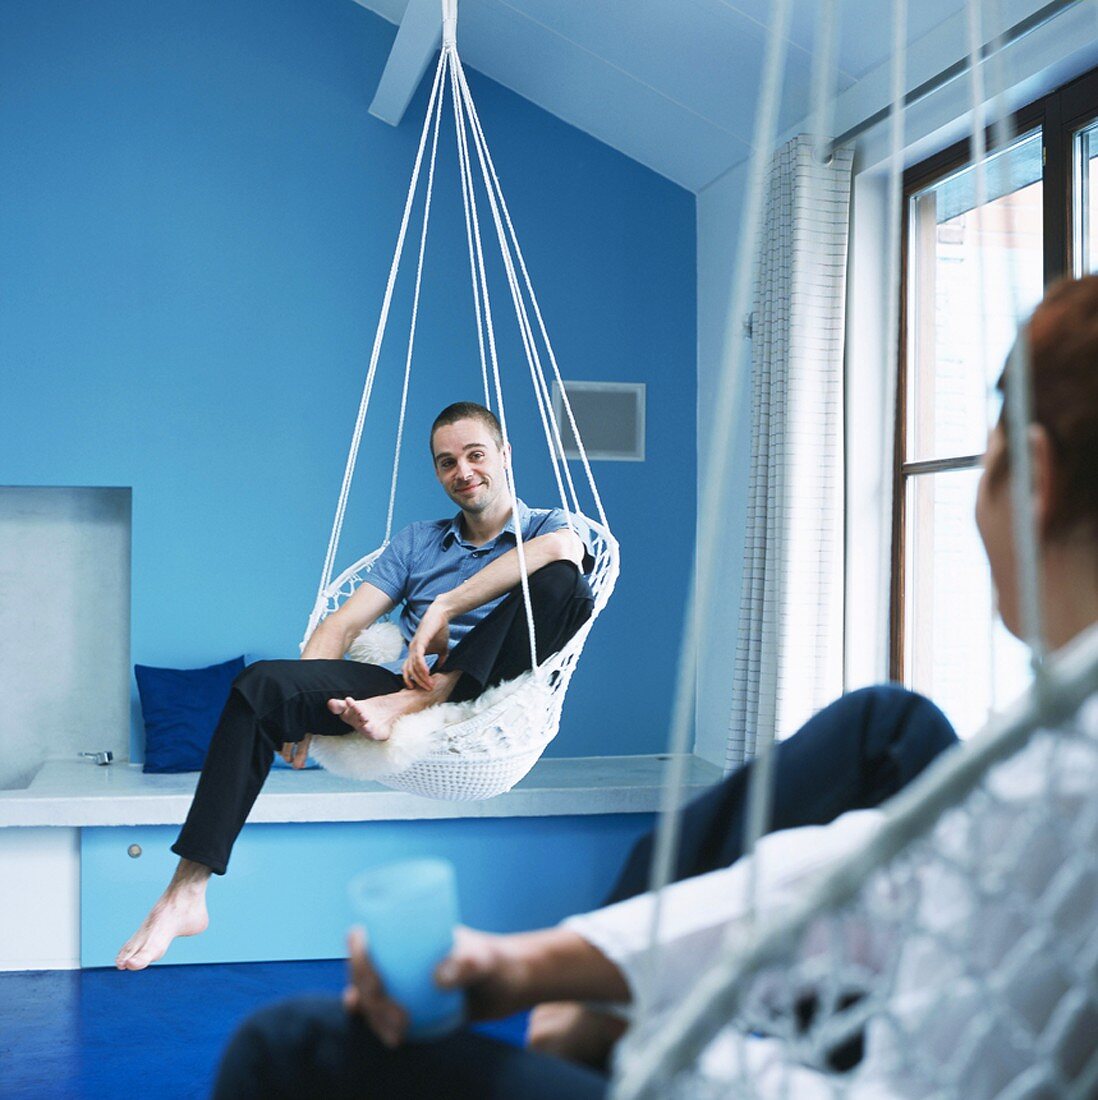 Two men sitting in hanging chairs in blue bedroom